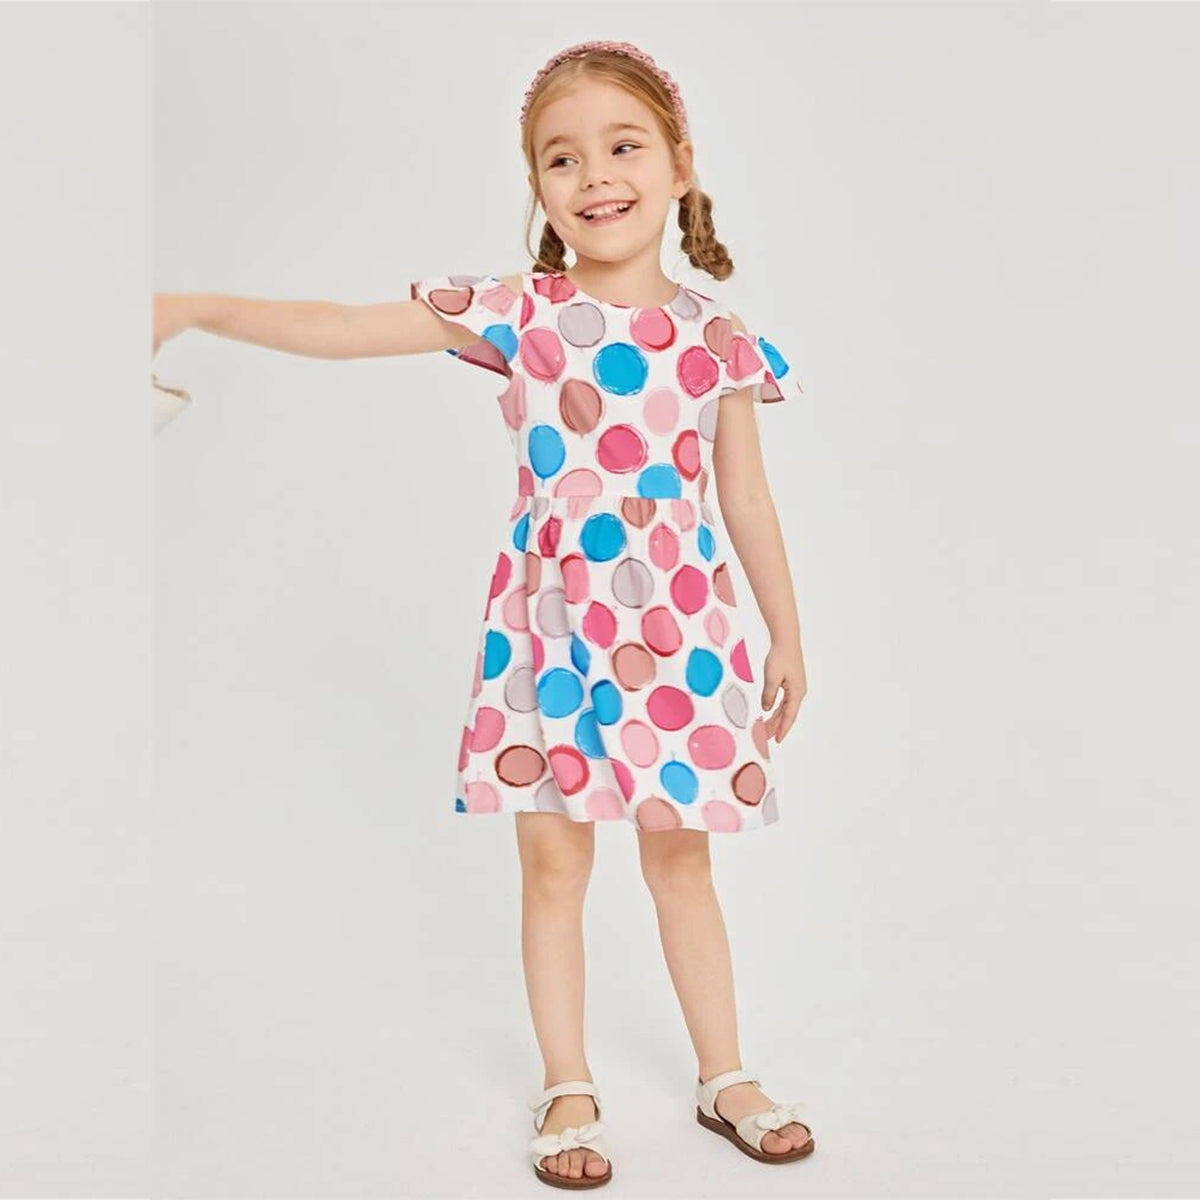 BabyGirl's Unique Designer Red Heart & Floral's Tunic Dress (Combo Pack Of 2) for Baby Girls.